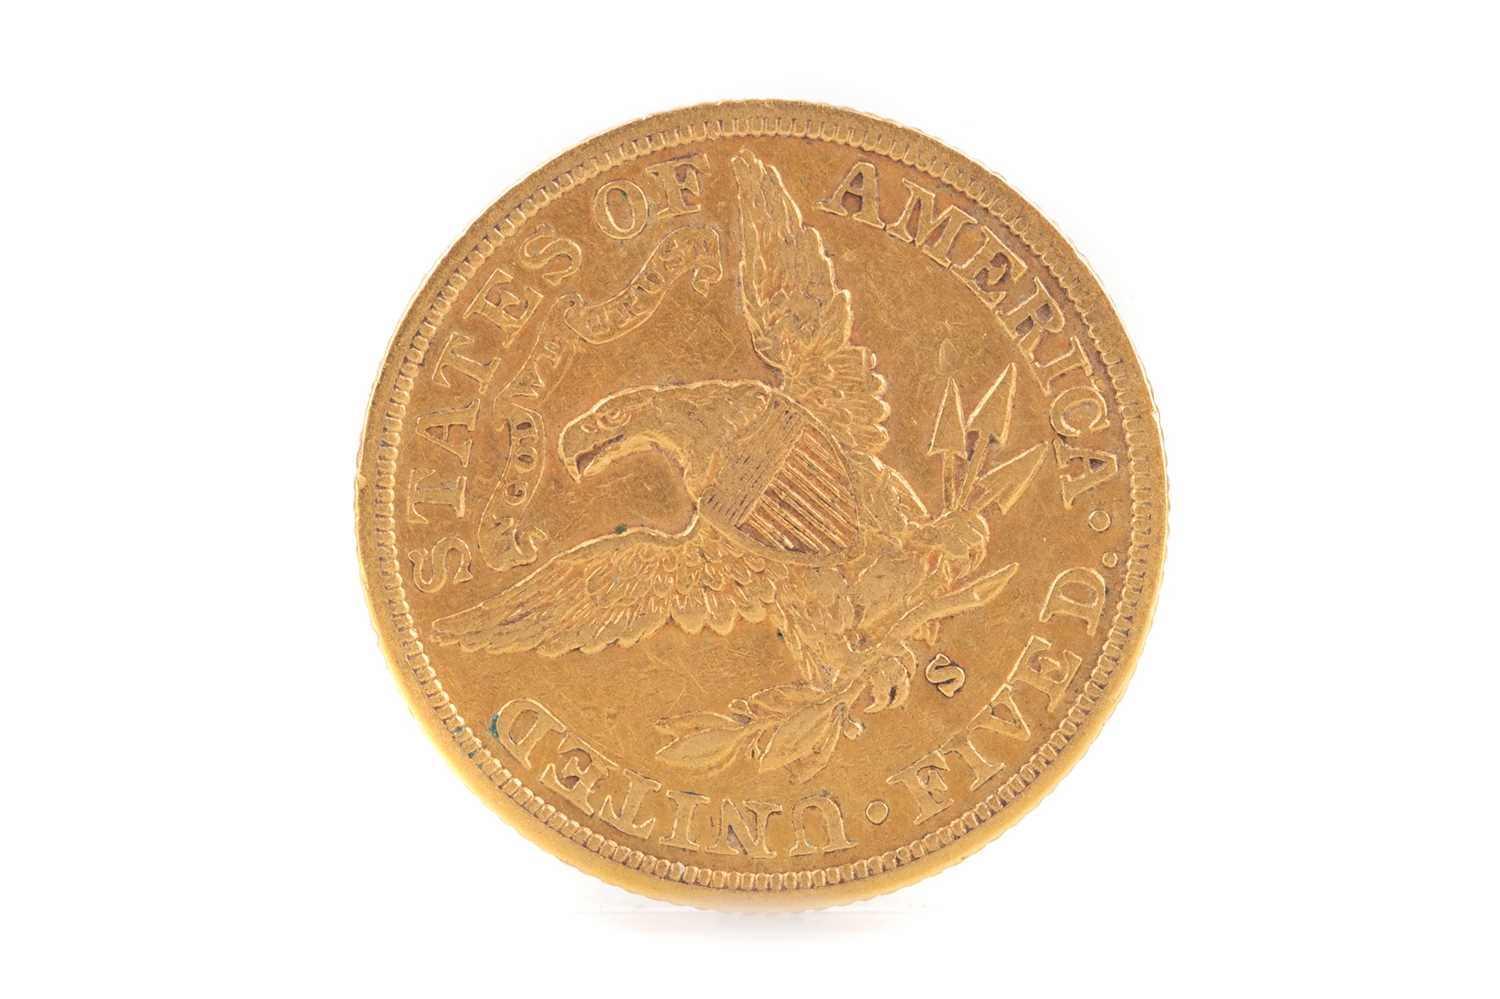 Lot 88 - UNITED STATES OF AMERICA FIVE D GOLD COIN DATED 1903